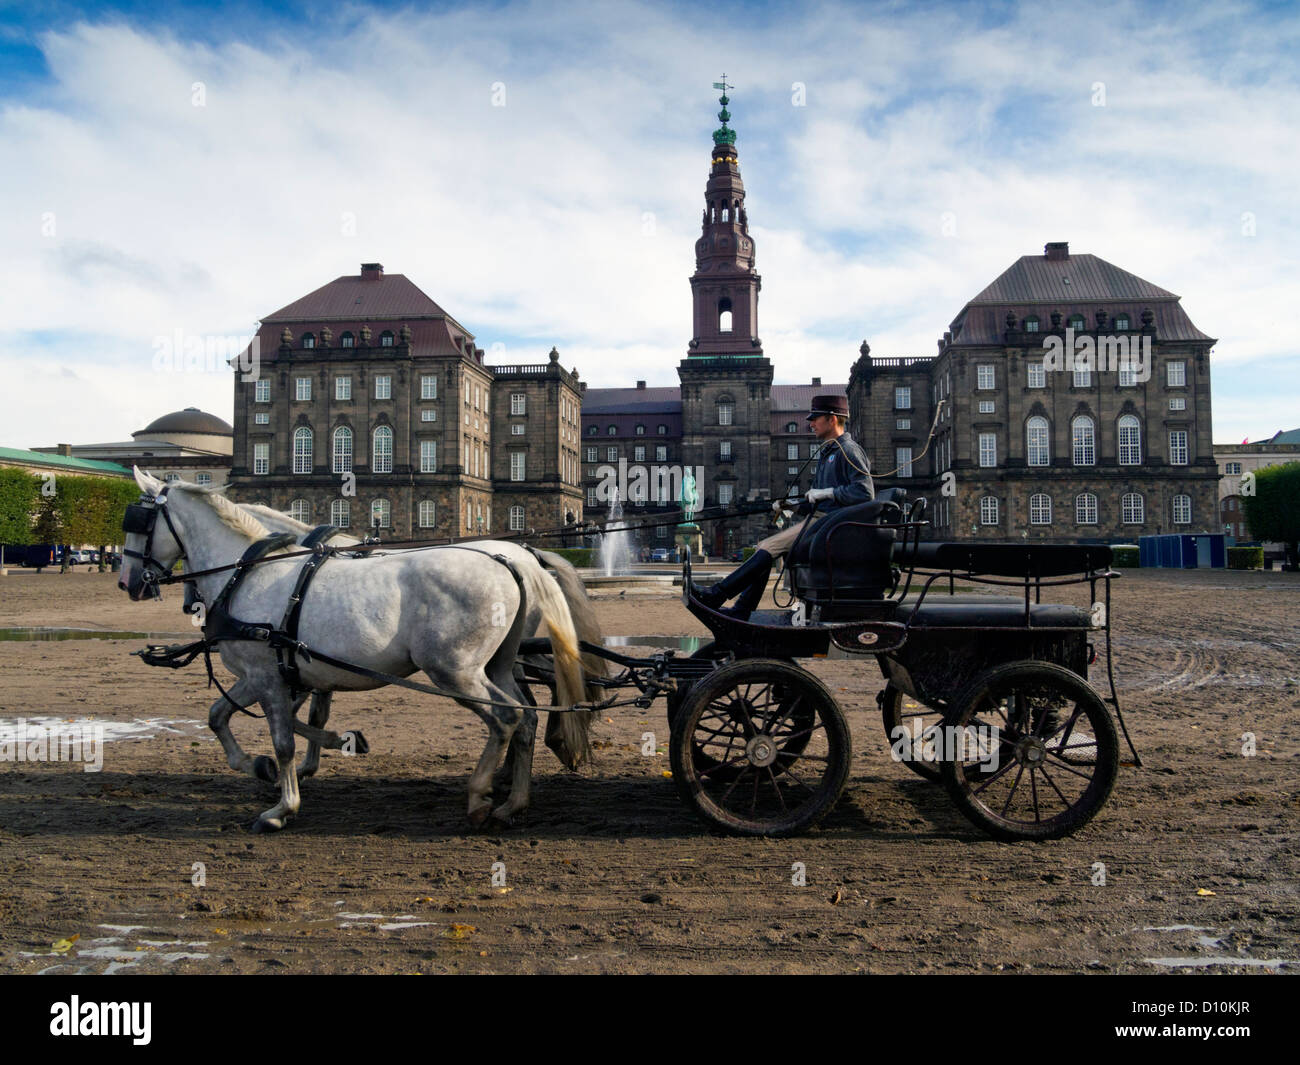 Royal horses being exercised on The Show Grounds (riding grounds) in front of Christiansborg Palace, Copenhagen, Denmark Stock Photo